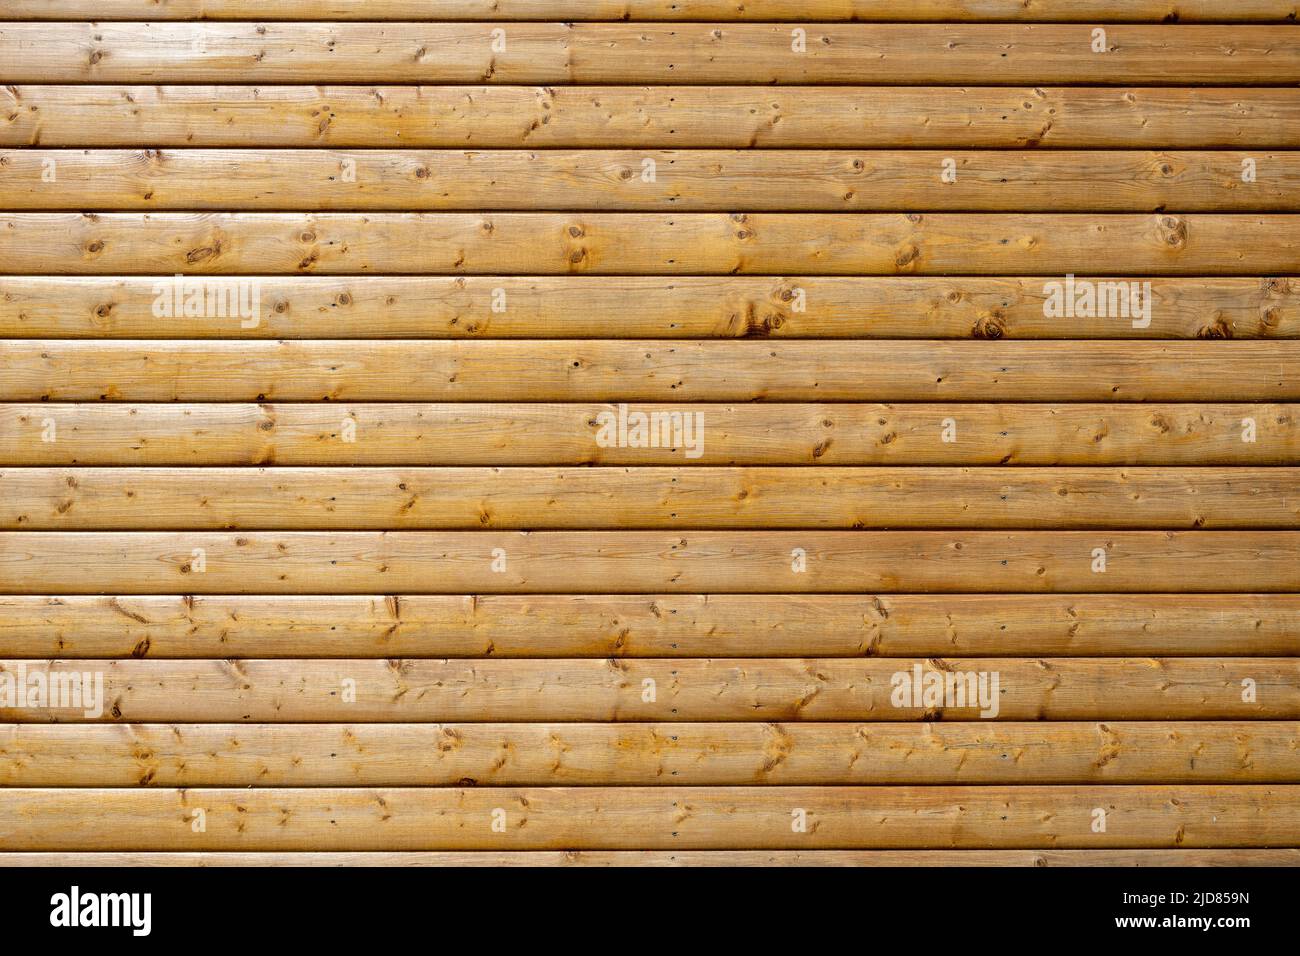 Background from a wall made of painted brown wooden planks Stock Photo